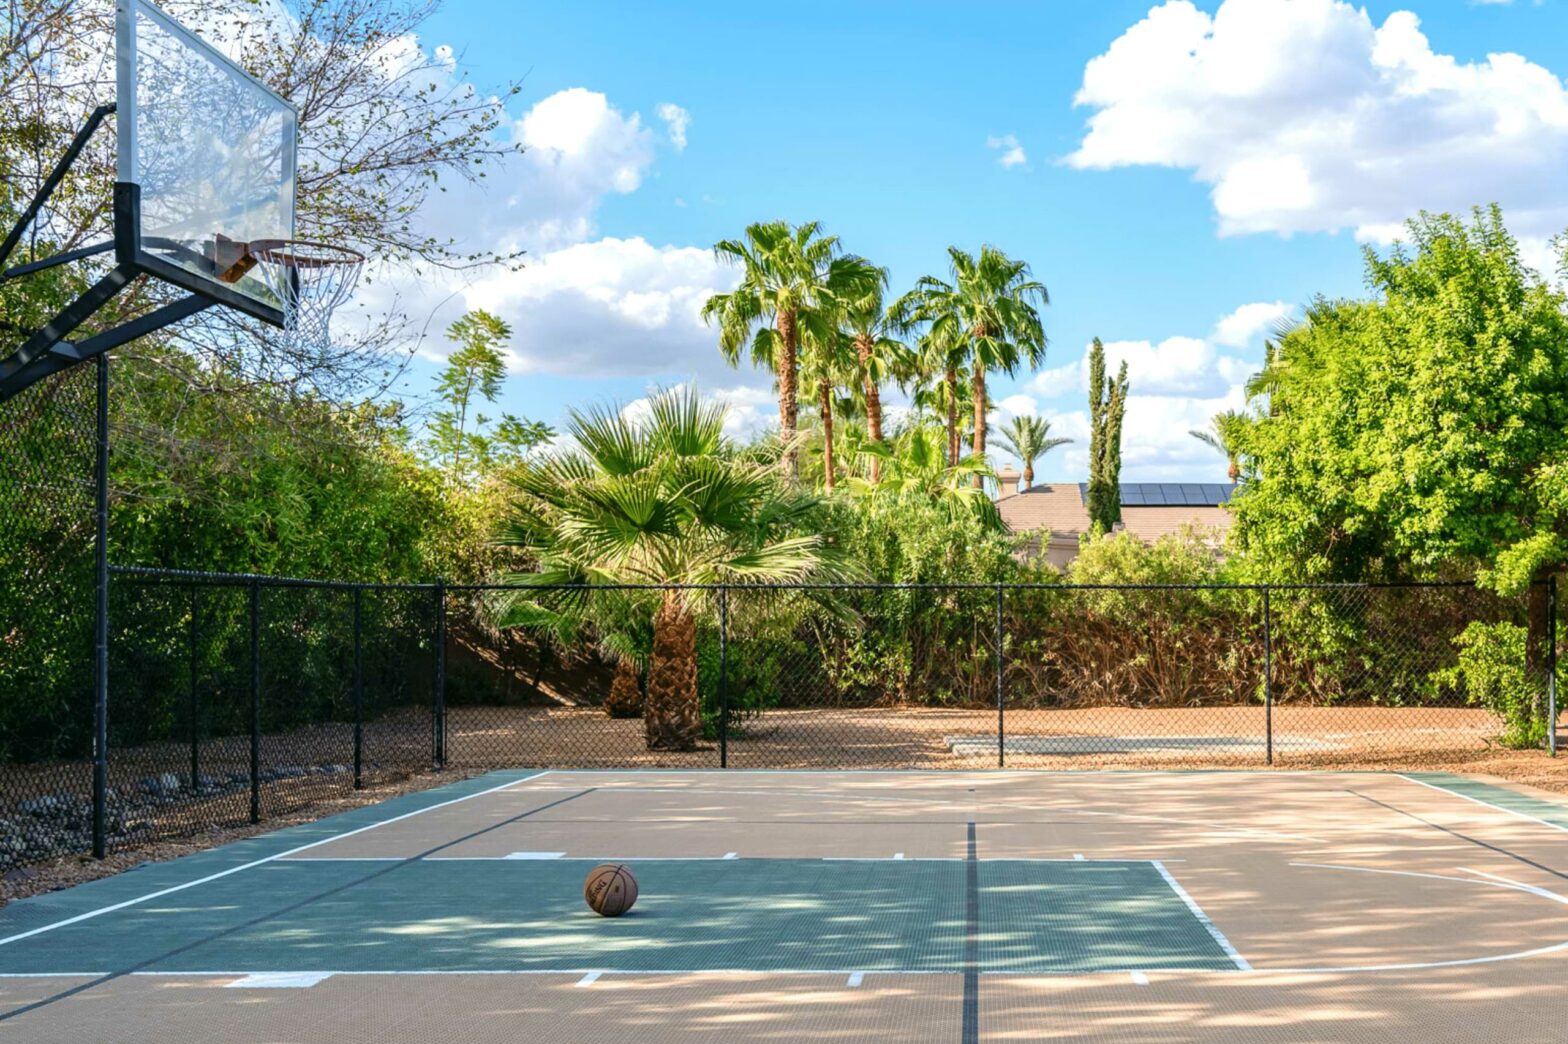 impressiive vacation home with basketball court